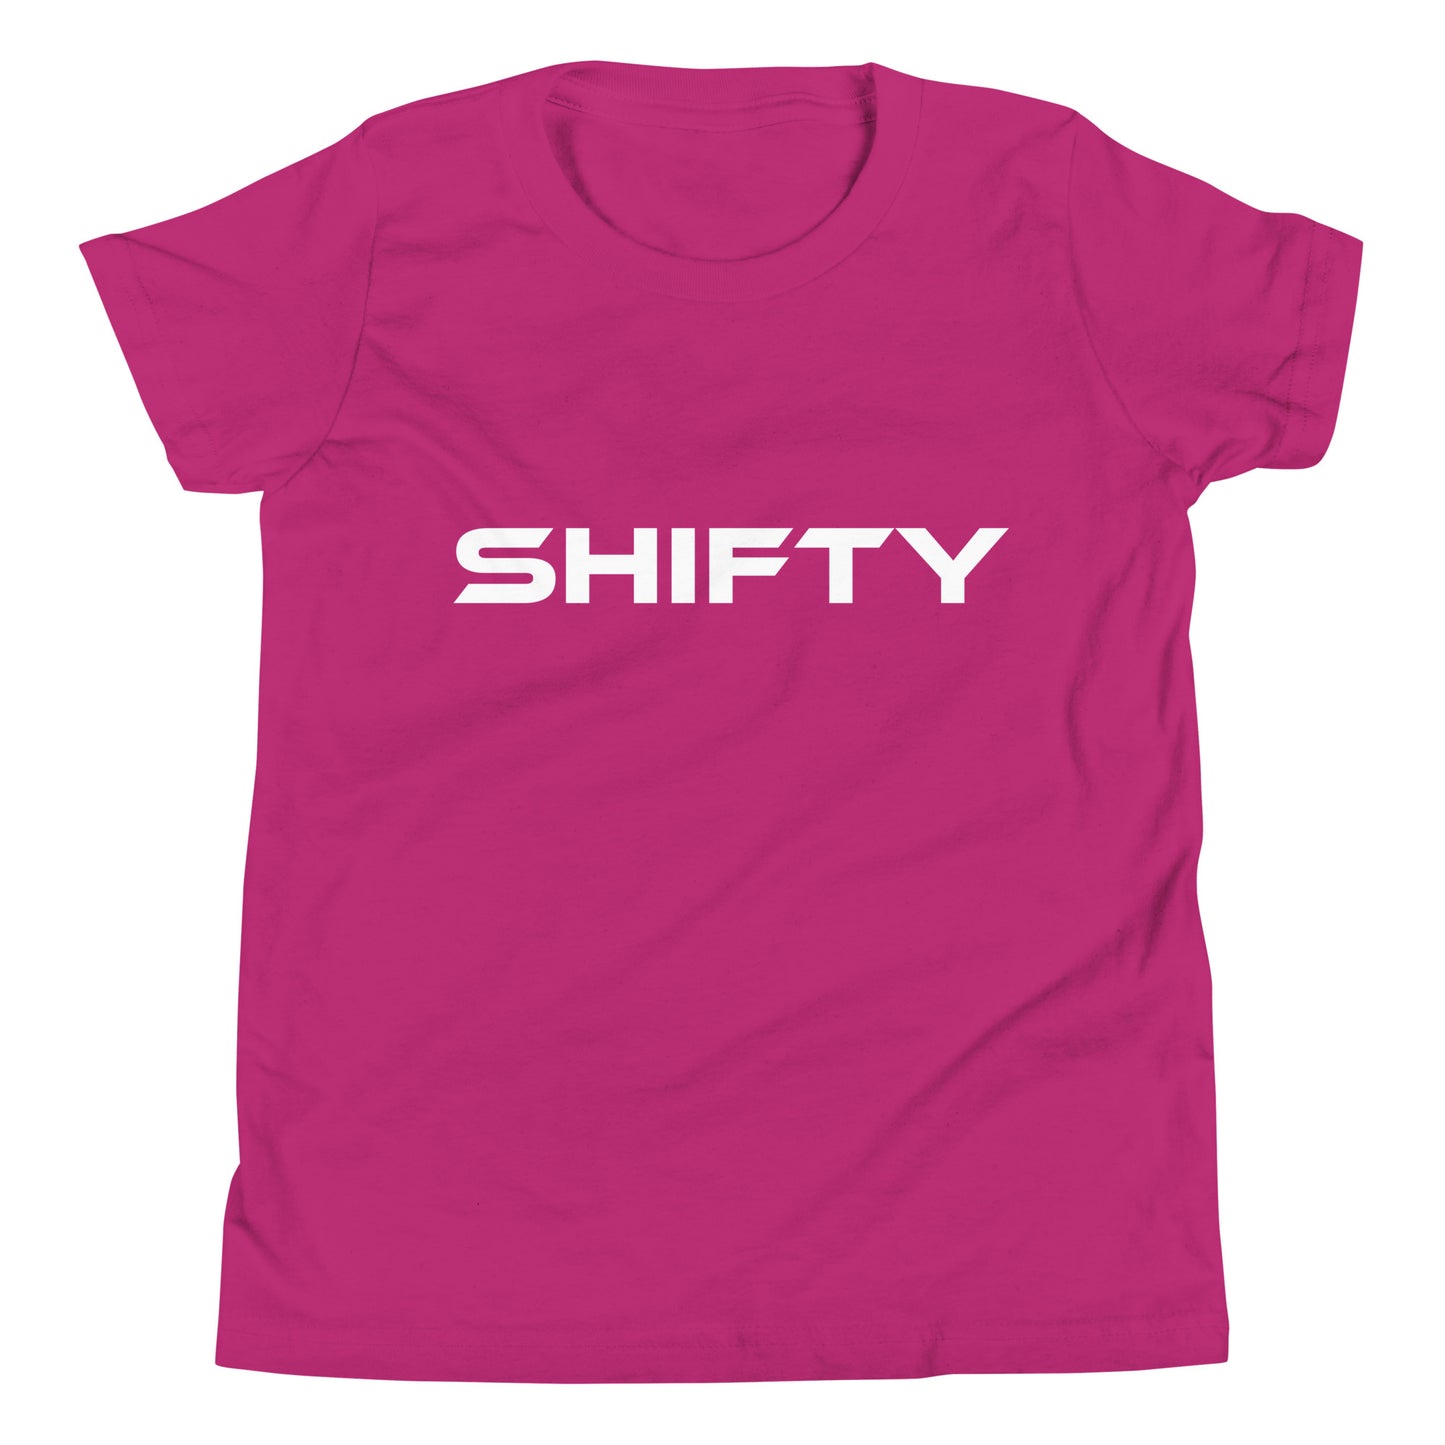 Shifty Youth Short Sleeve T-Shirt - Perfect Fit for Active Kids